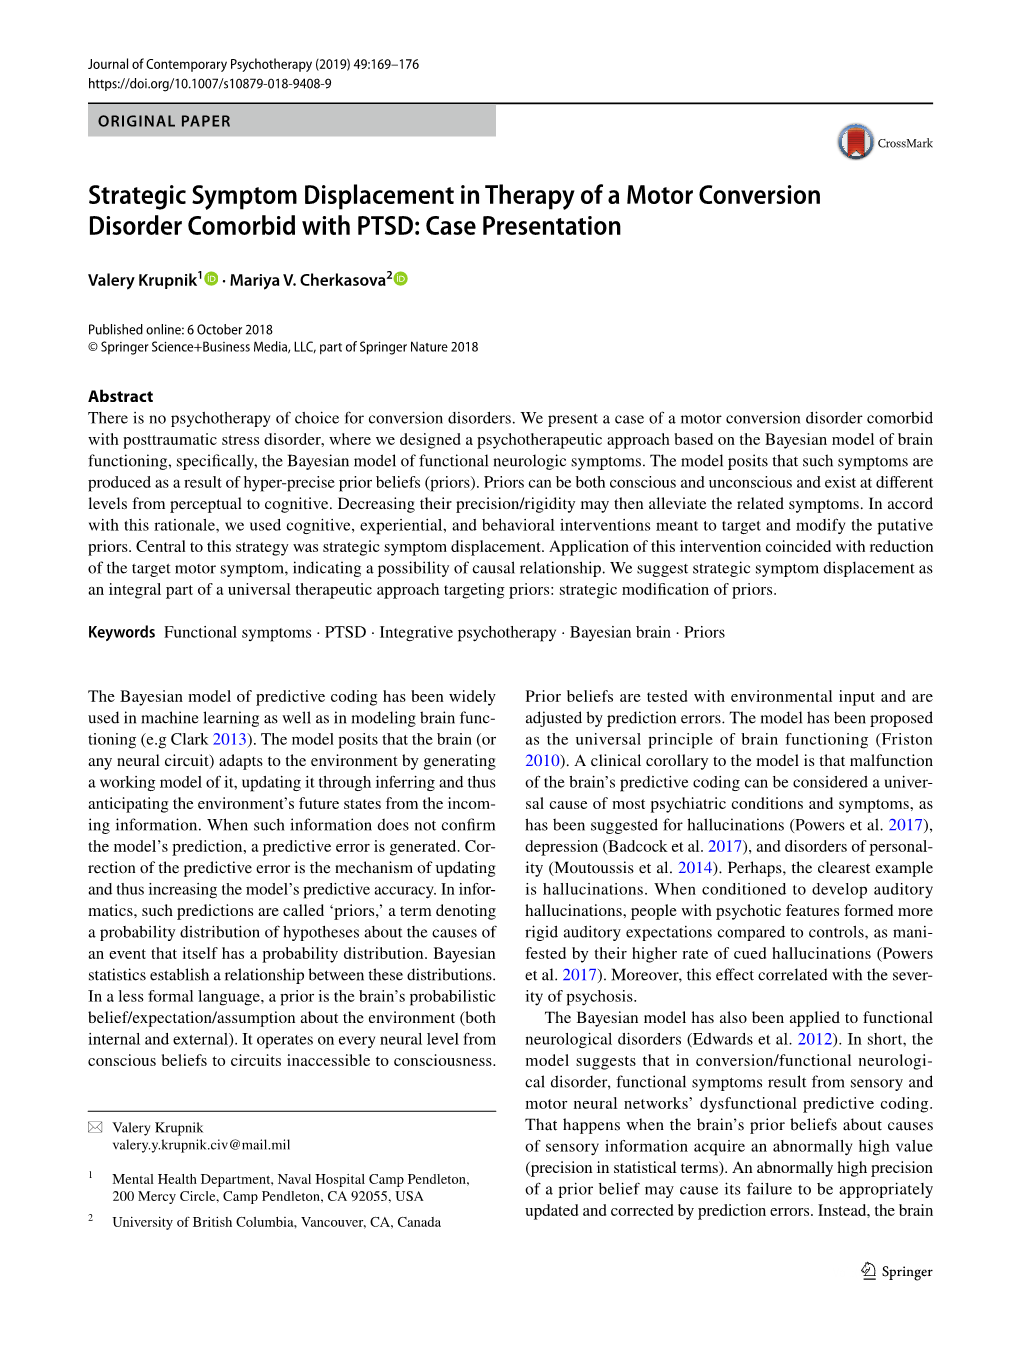 Strategic Symptom Displacement in Therapy of a Motor Conversion Disorder Comorbid with PTSD: Case Presentation